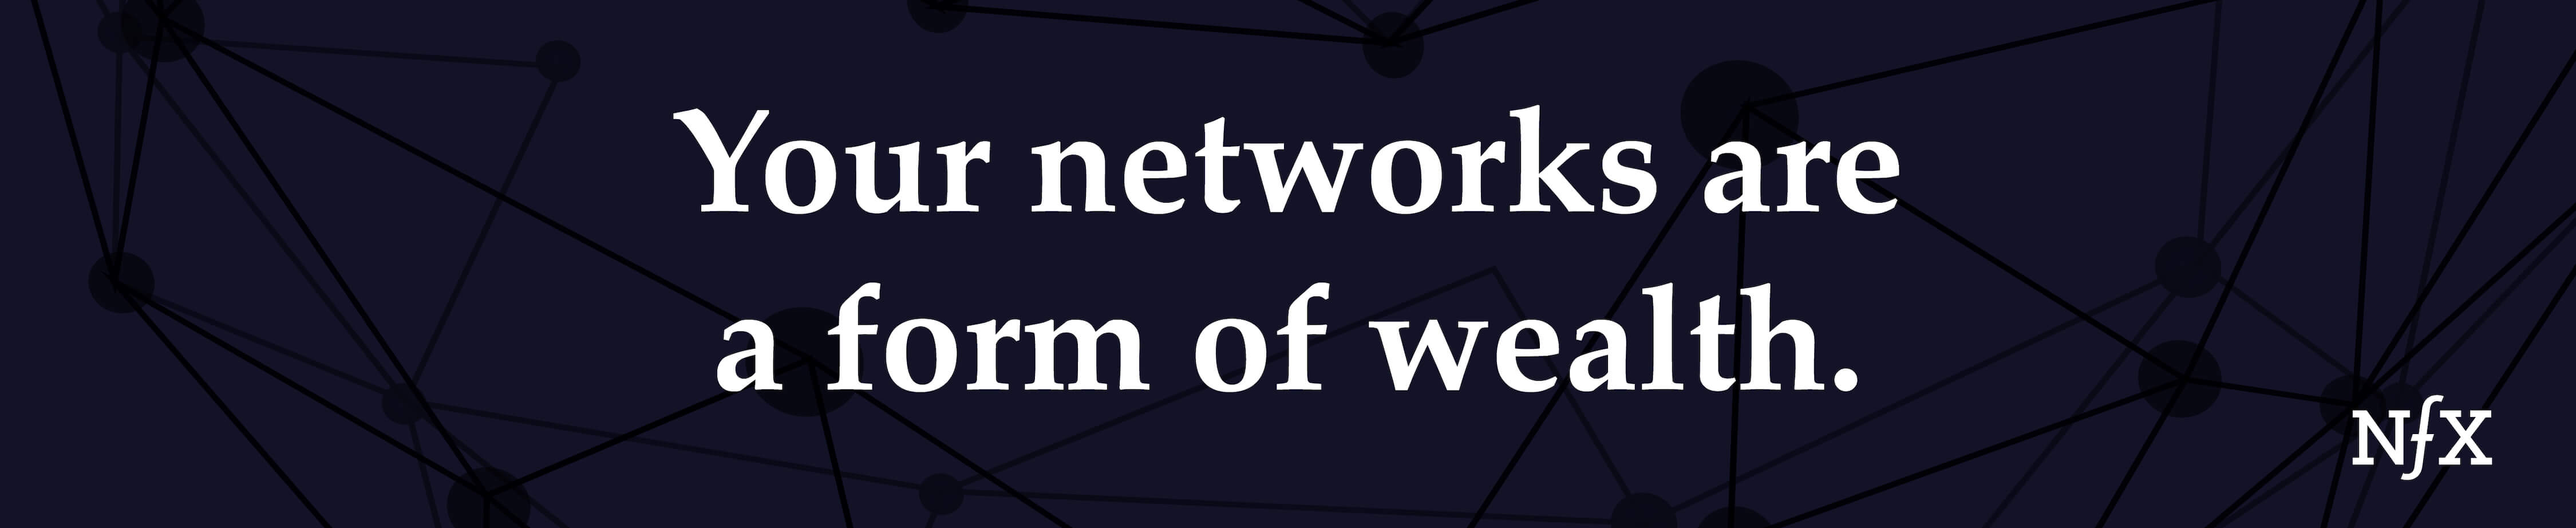 Your networks are a form of wealth.